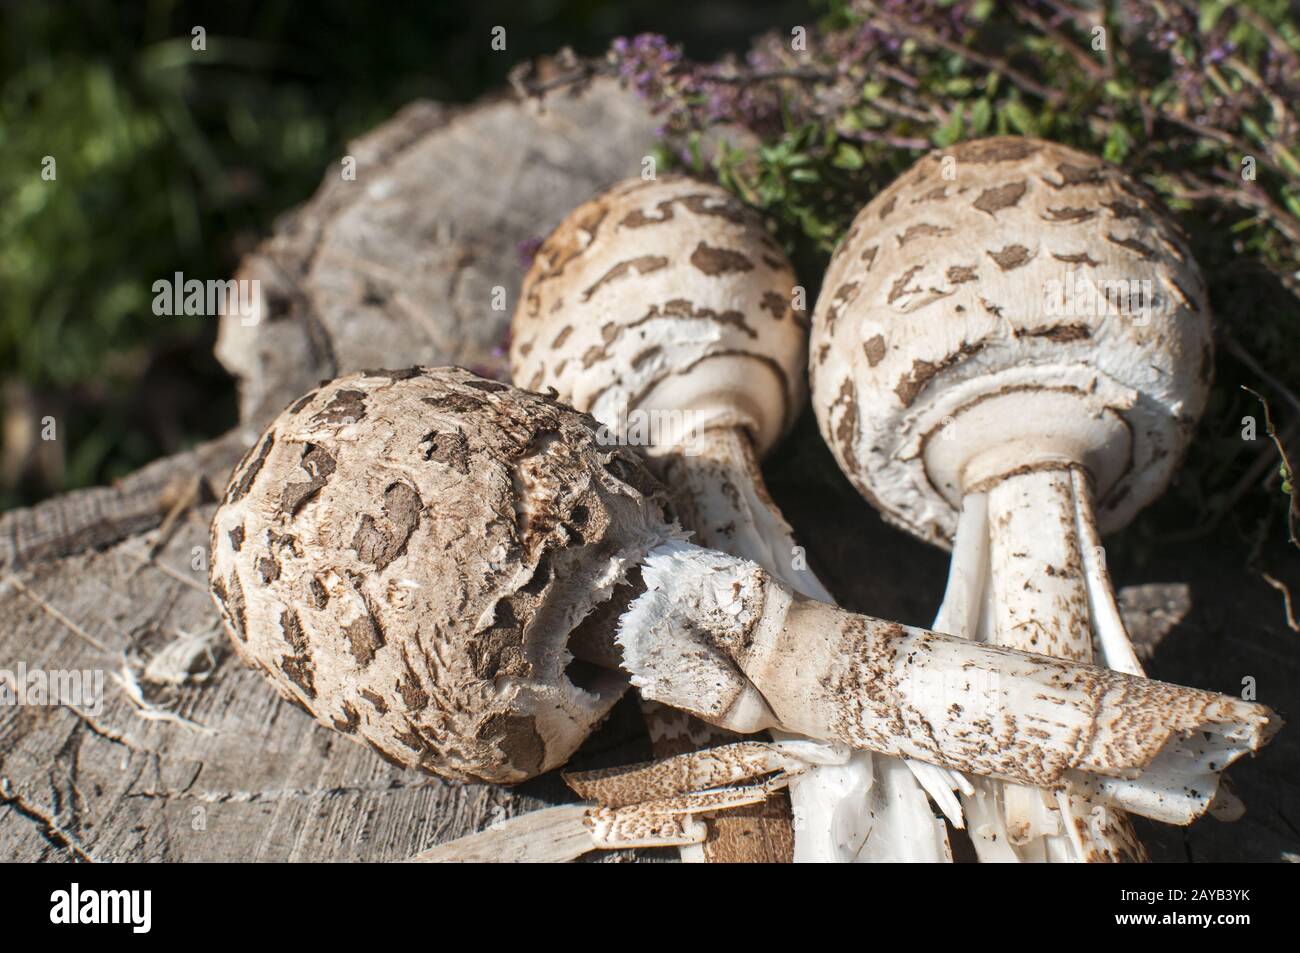 Young  parasol mushrooms and wild herbs on old wooden stump Stock Photo